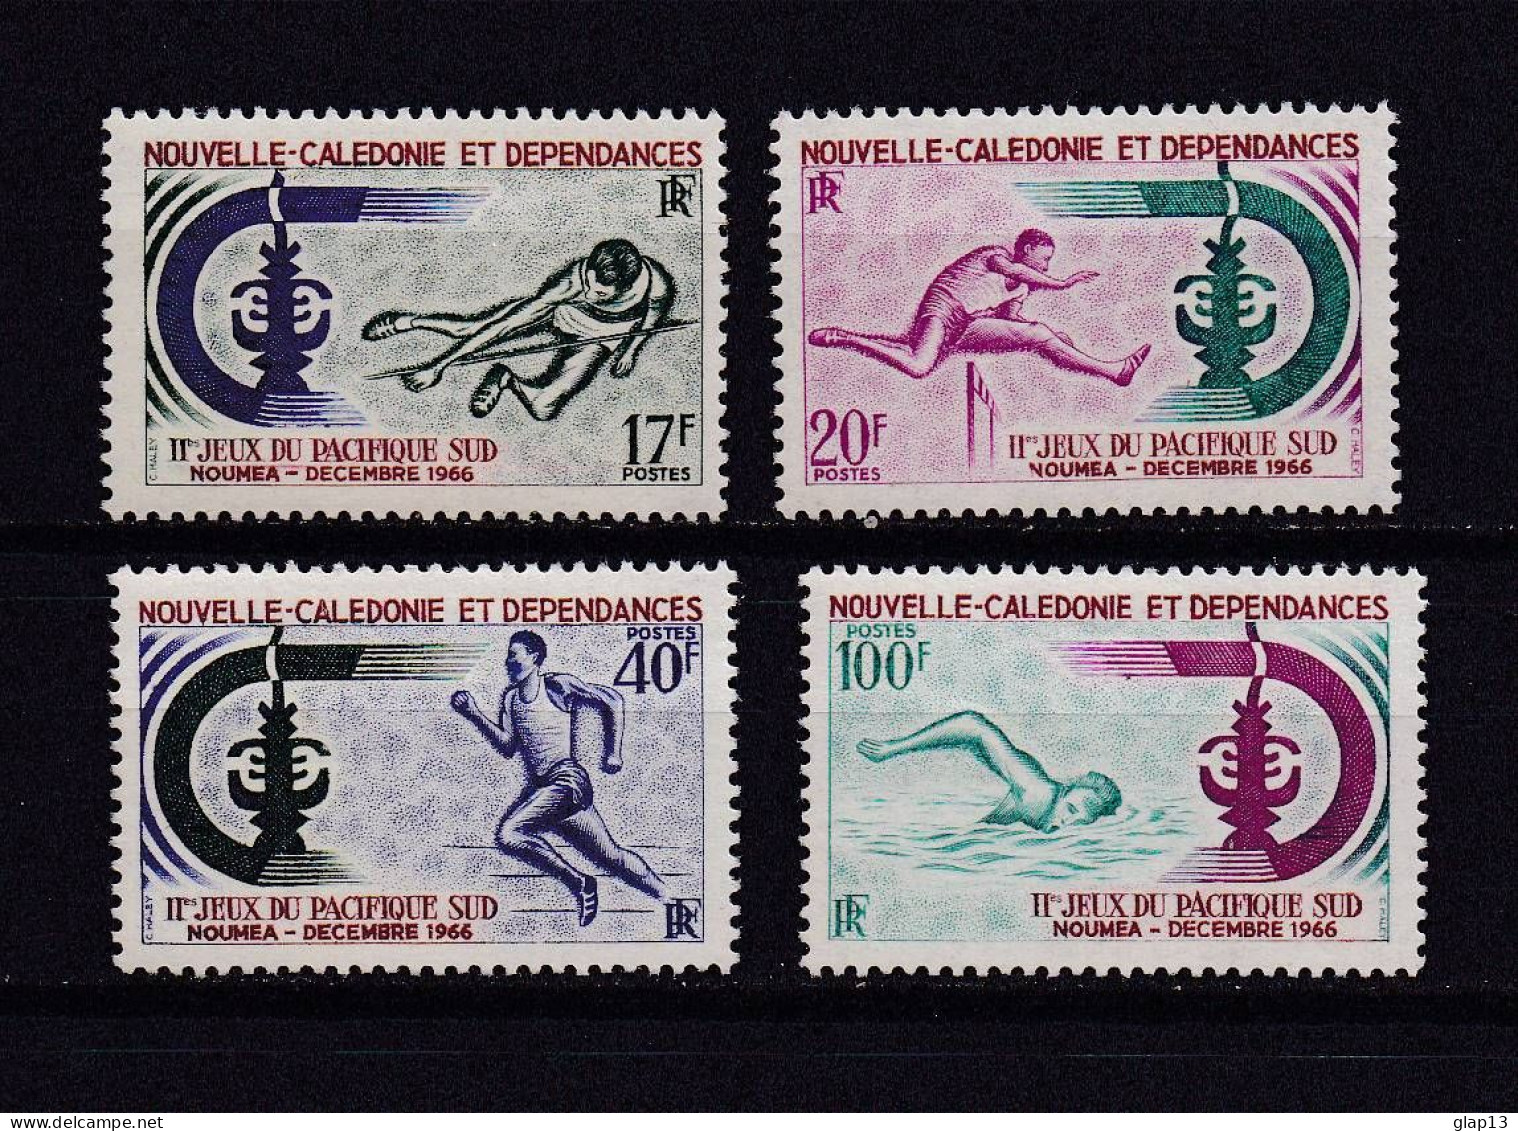 NOUVELLE-CALEDONIE 1966 TIMBRE N°332/35 NEUF AVEC CHARNIERE SPORTS - Neufs